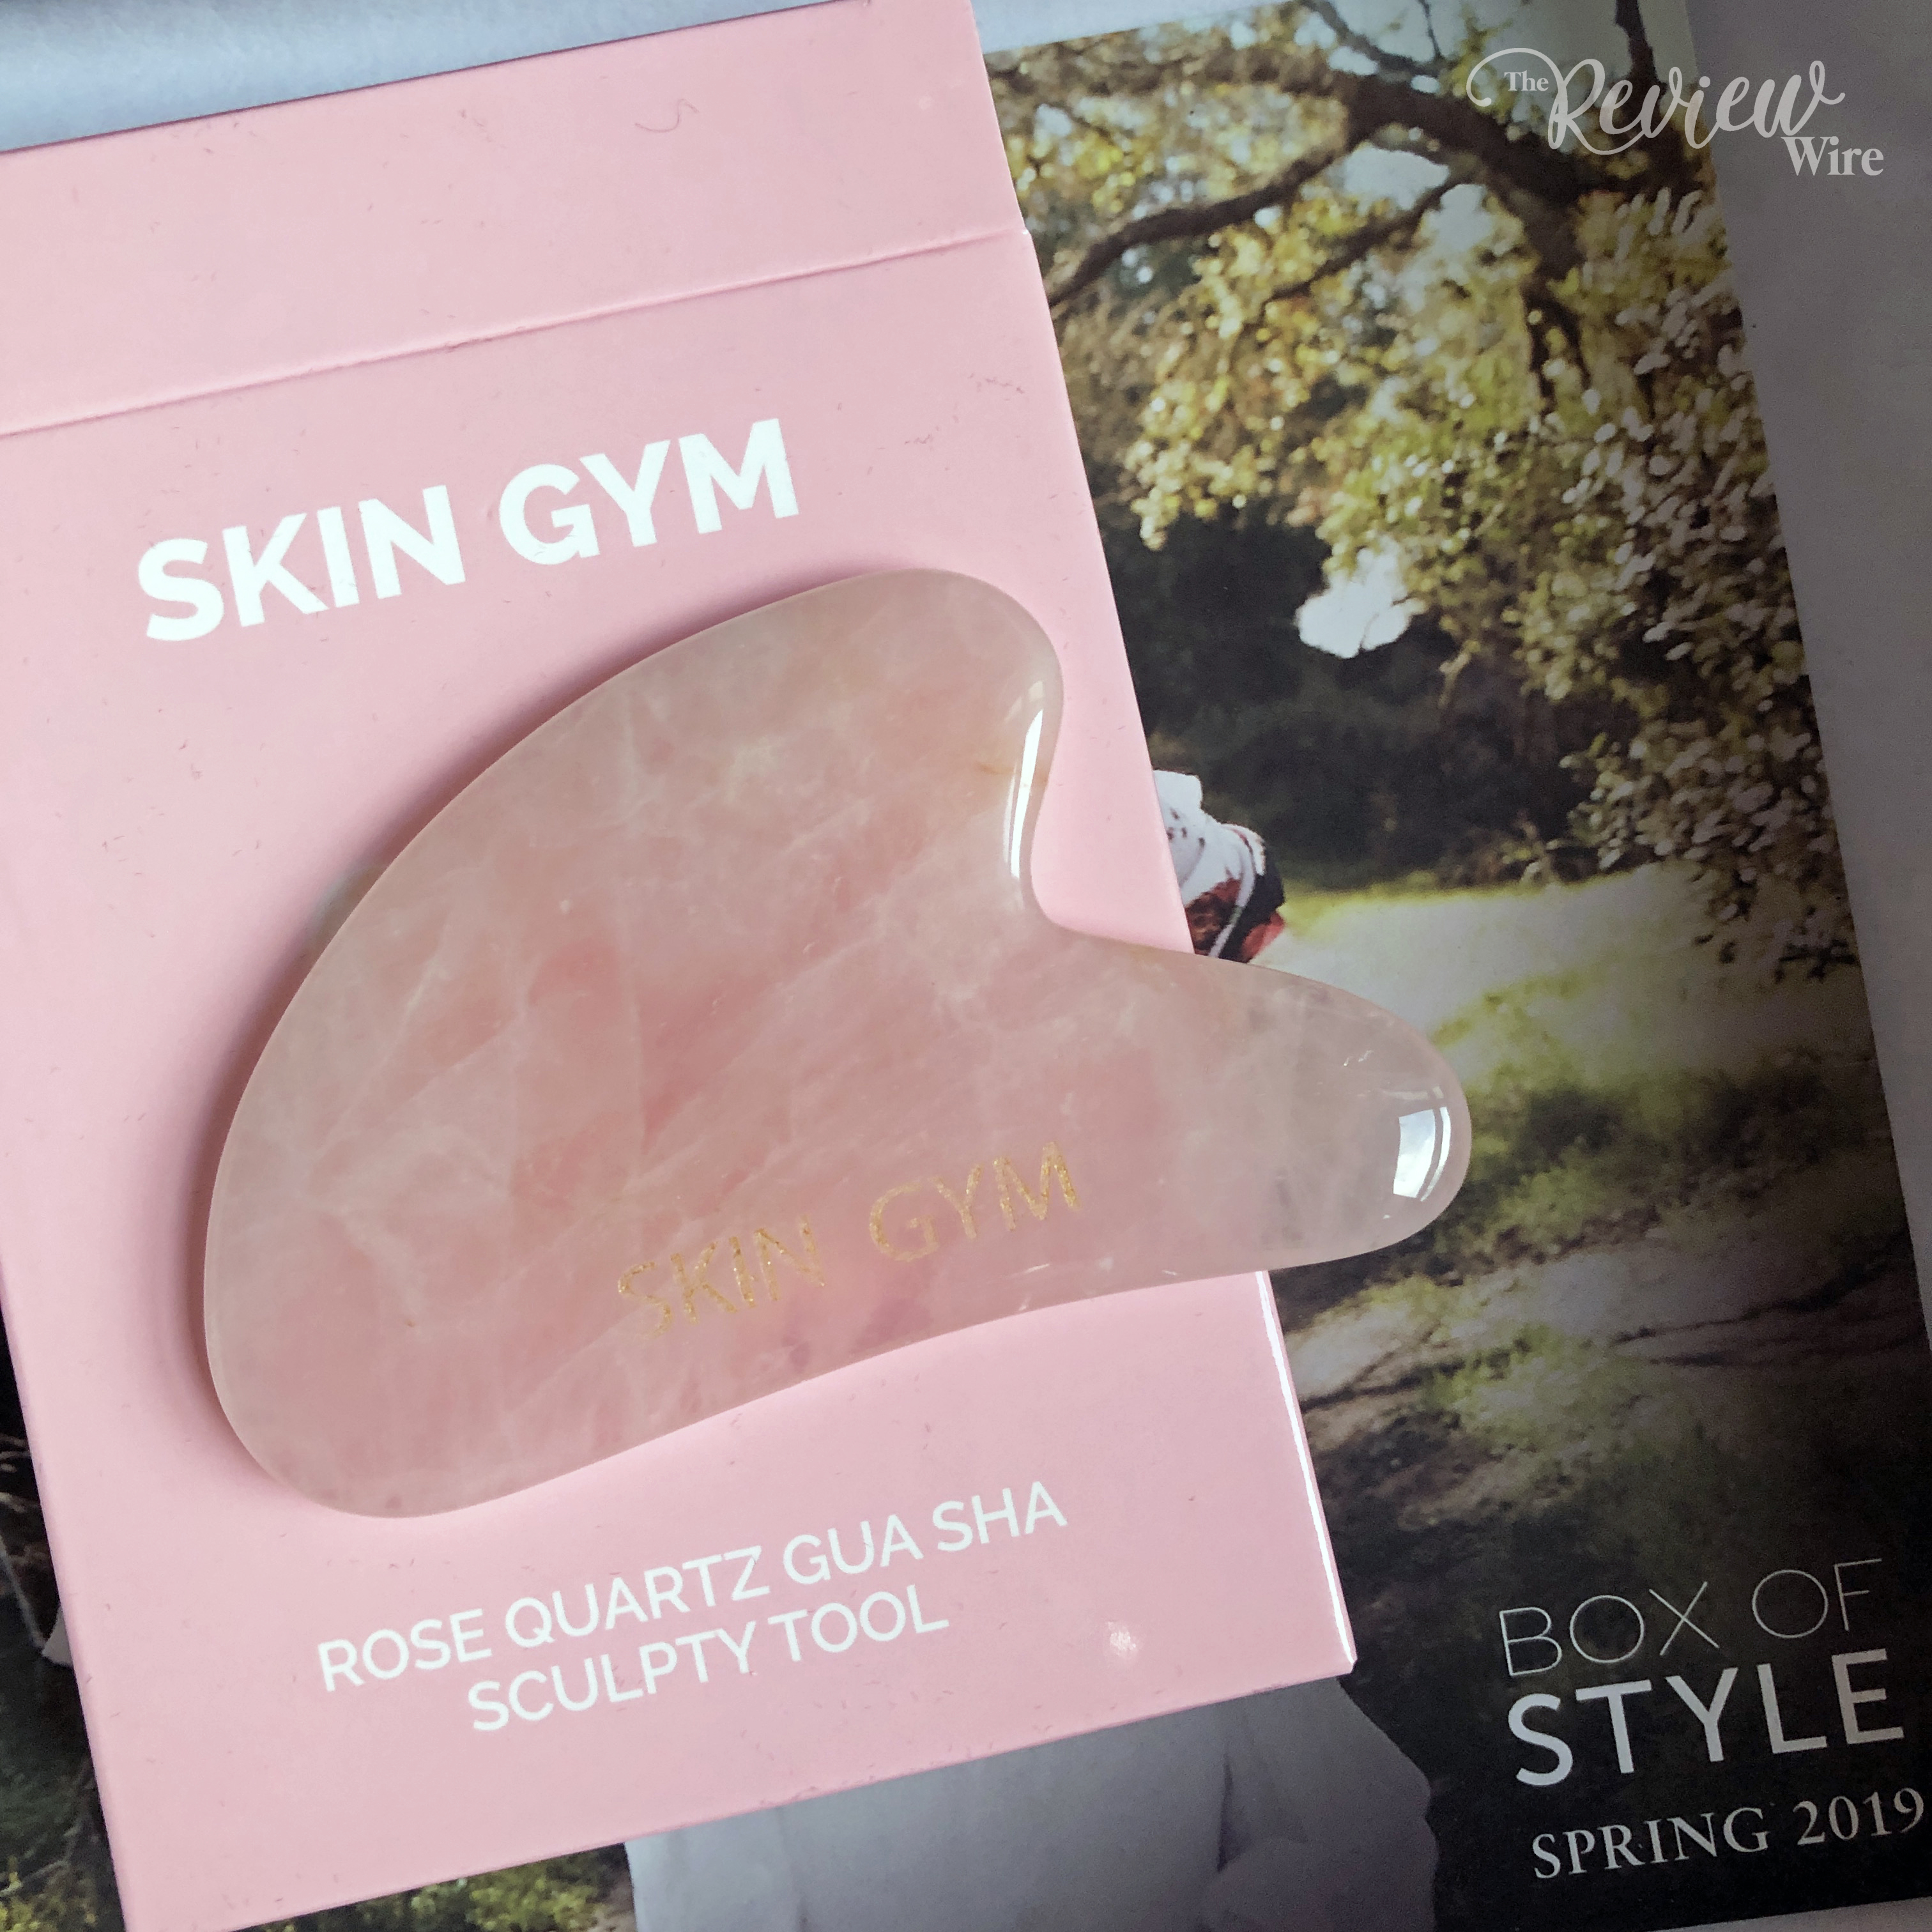 The Review Wire: Spring 2019 Rachel Zoe’s Box of Style Video Unboxing - Skin Gym